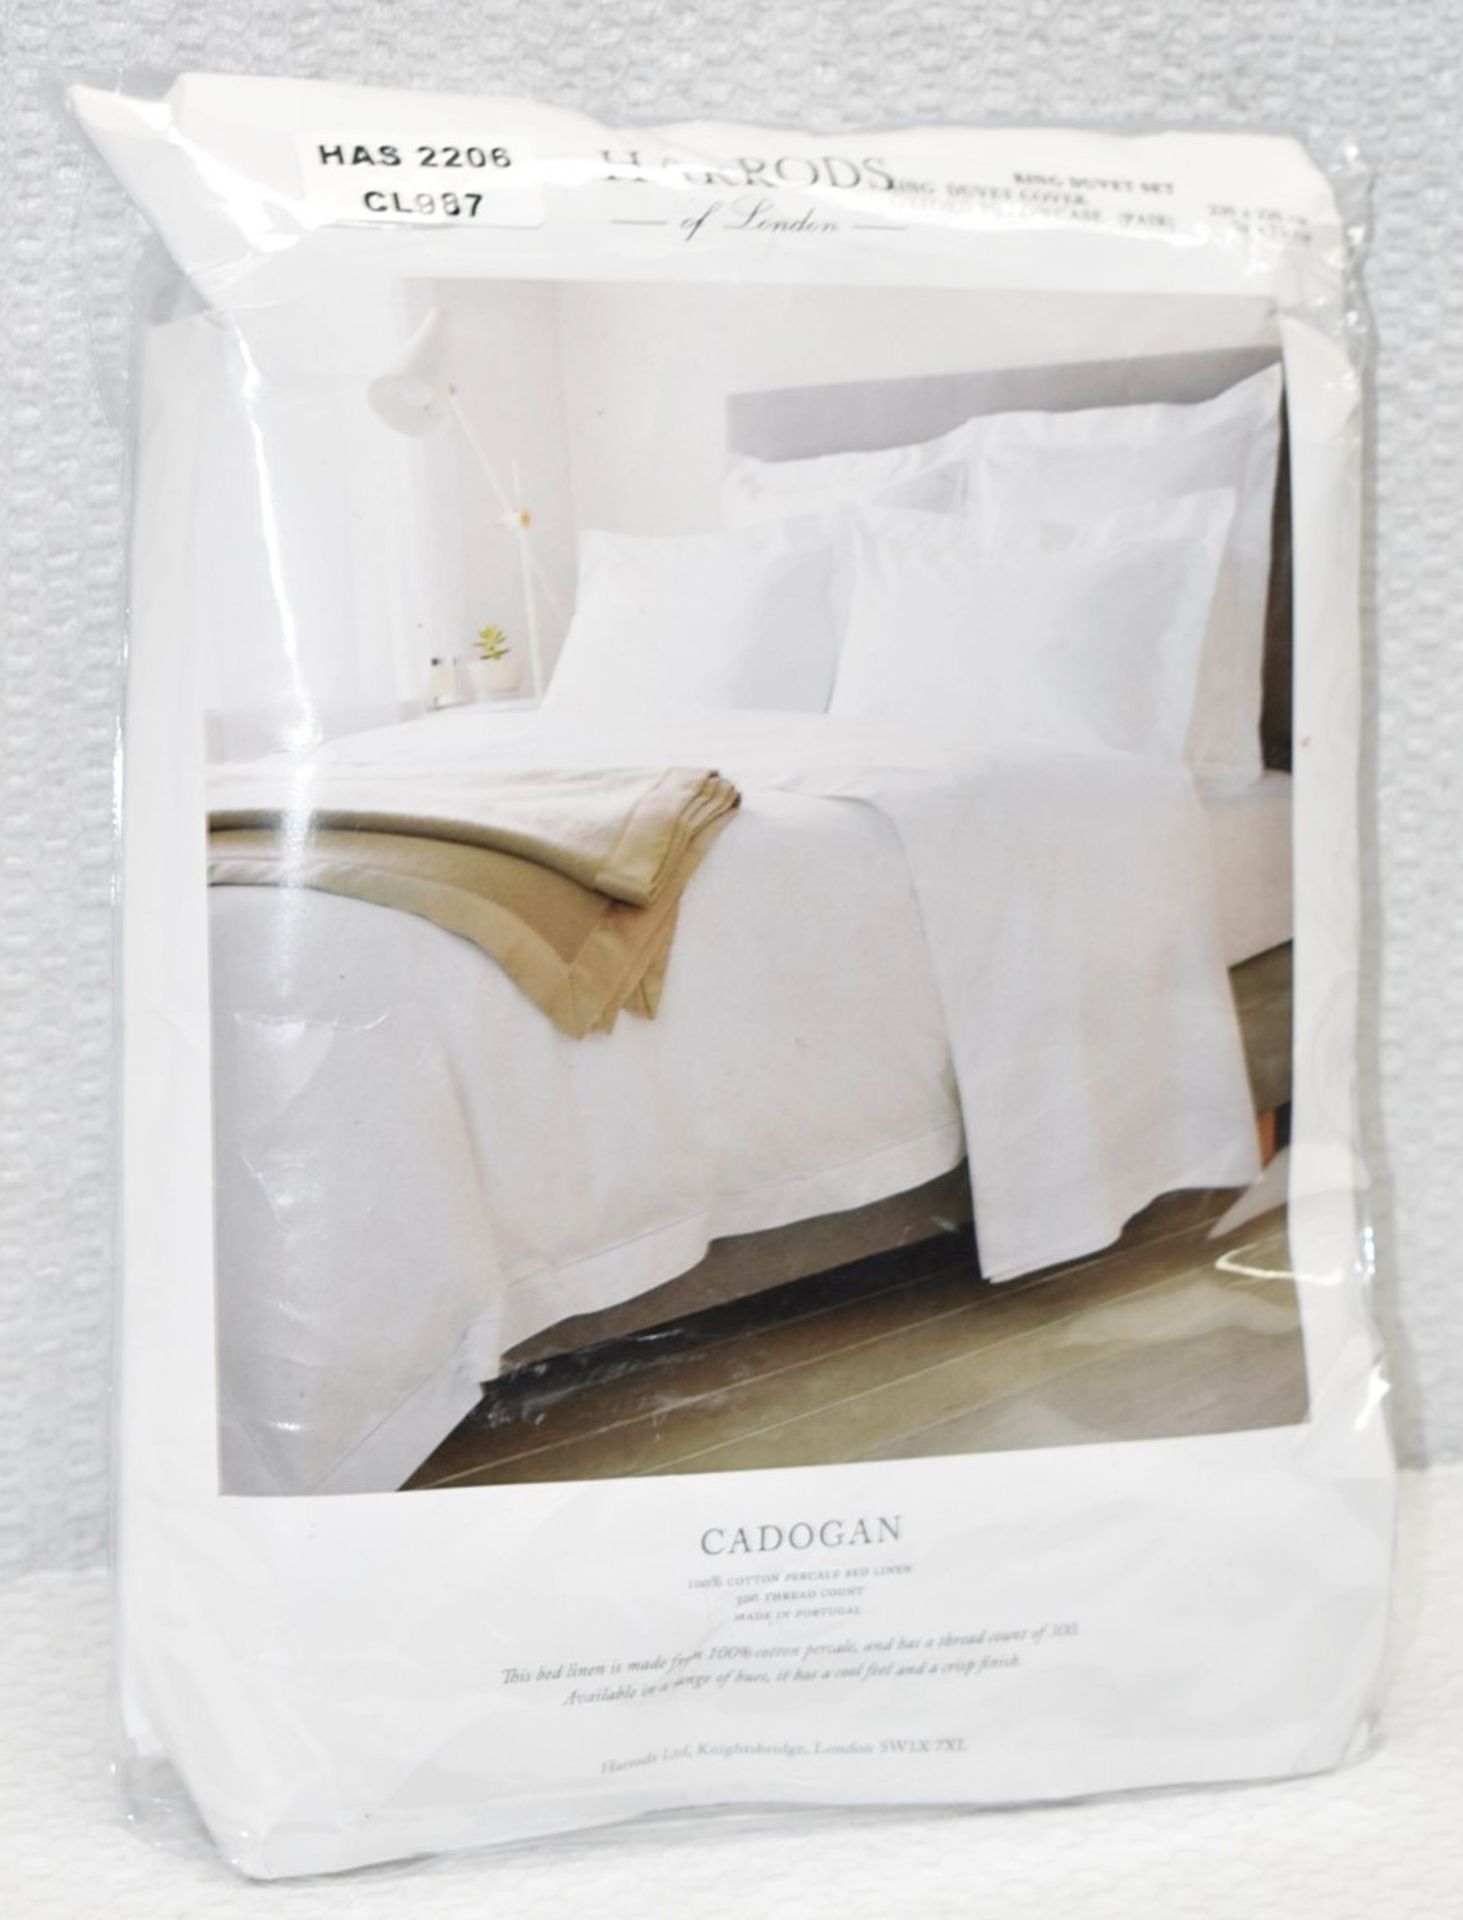 1 x HARRODS OF LONDON 'Cadogan' King Duvet Cover Set, With Pillow Cases - Original Price £239.00 - Image 5 of 9